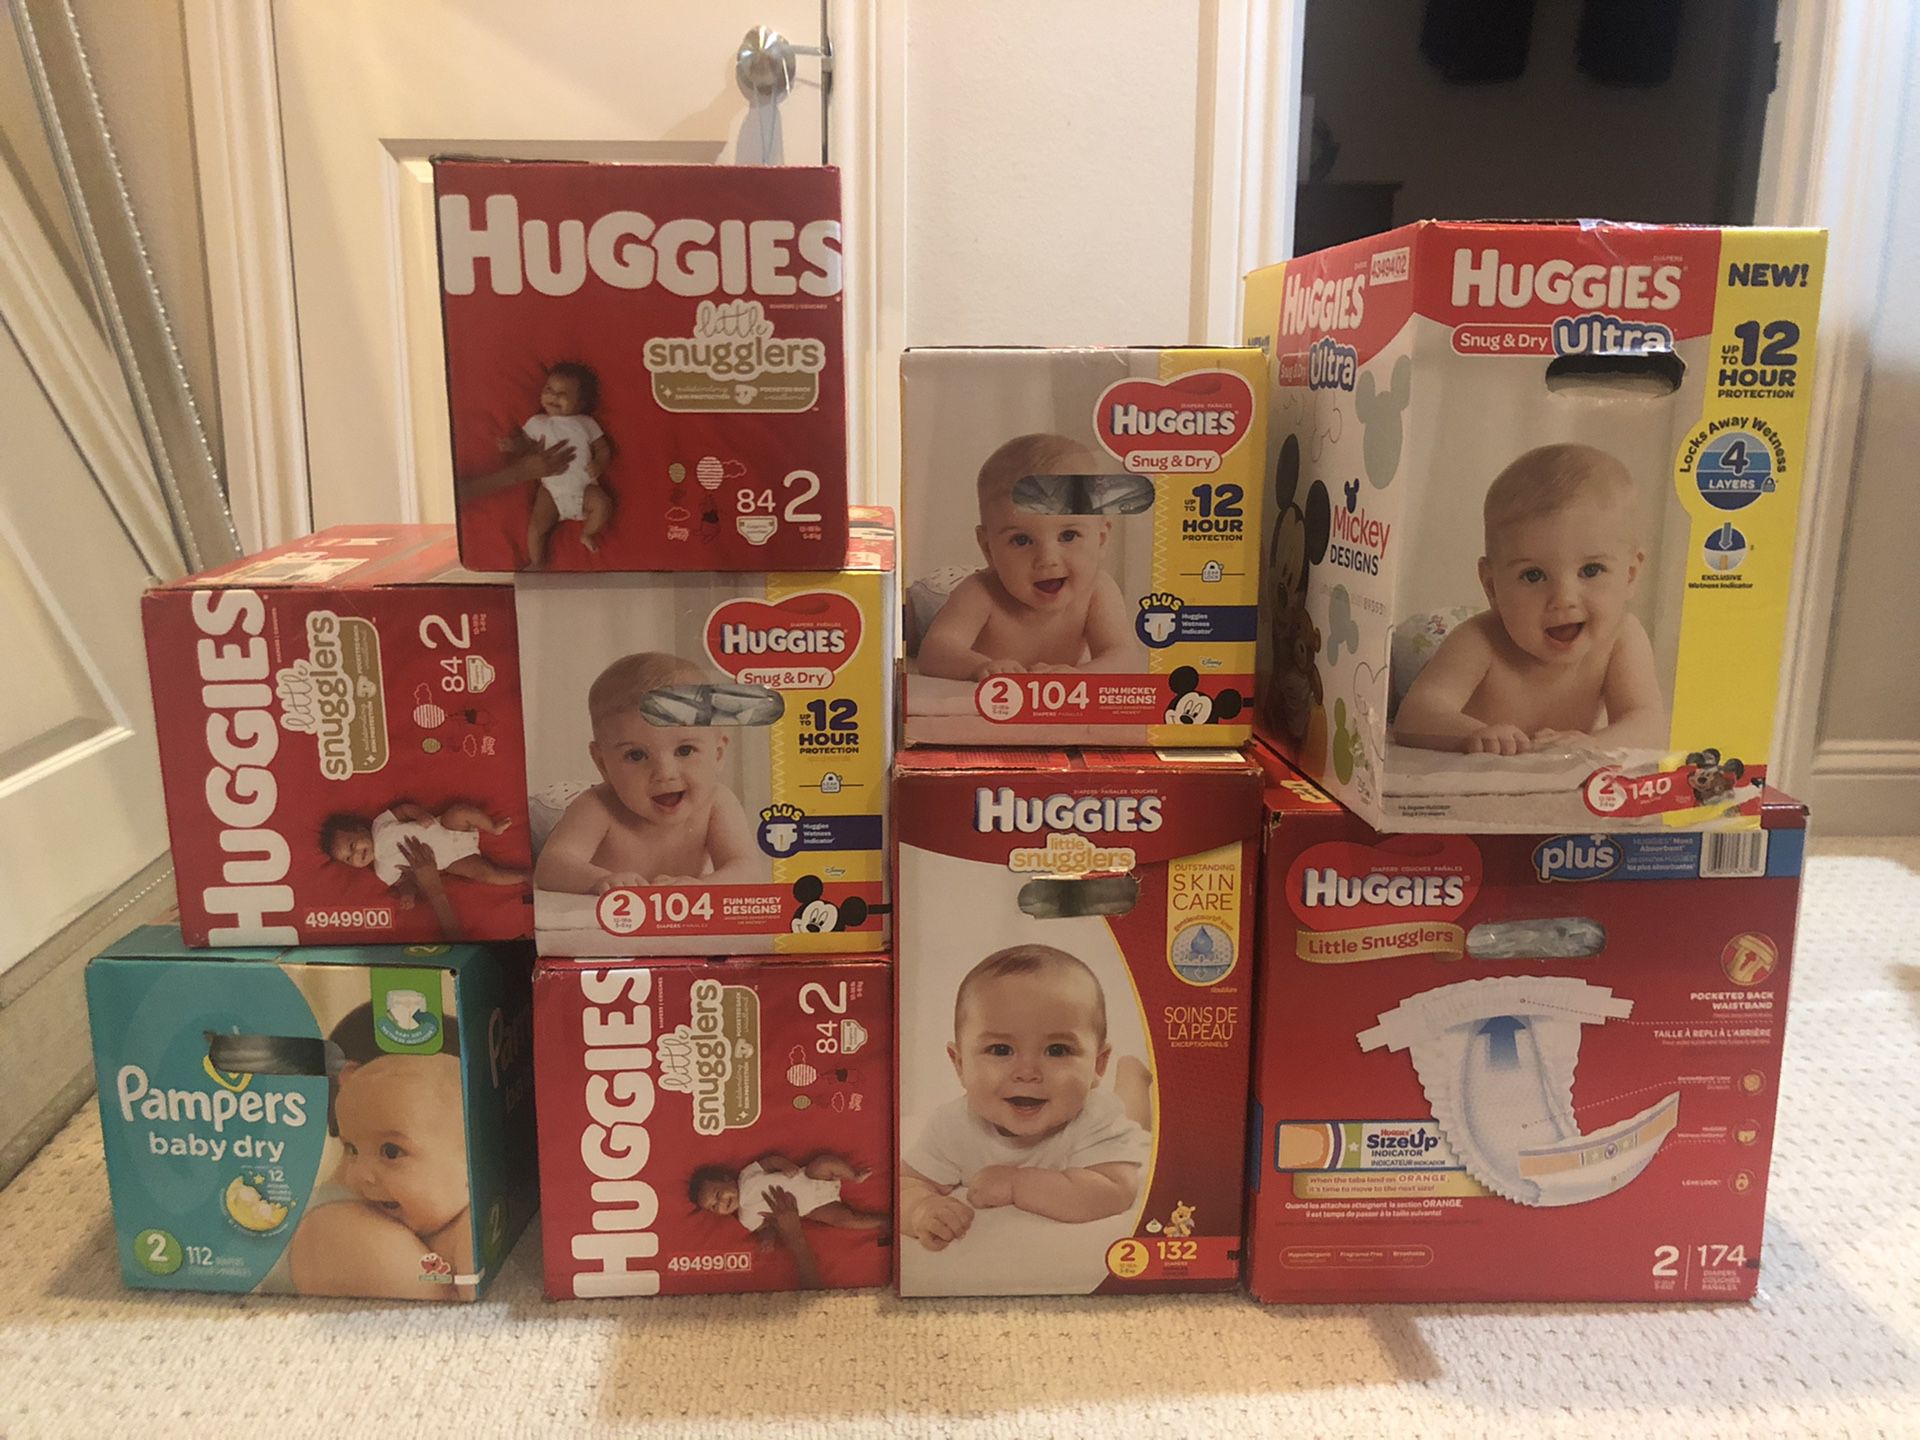 Brand new, unopened Size 2 diapers for sale (non-negotiable) - UPDATED